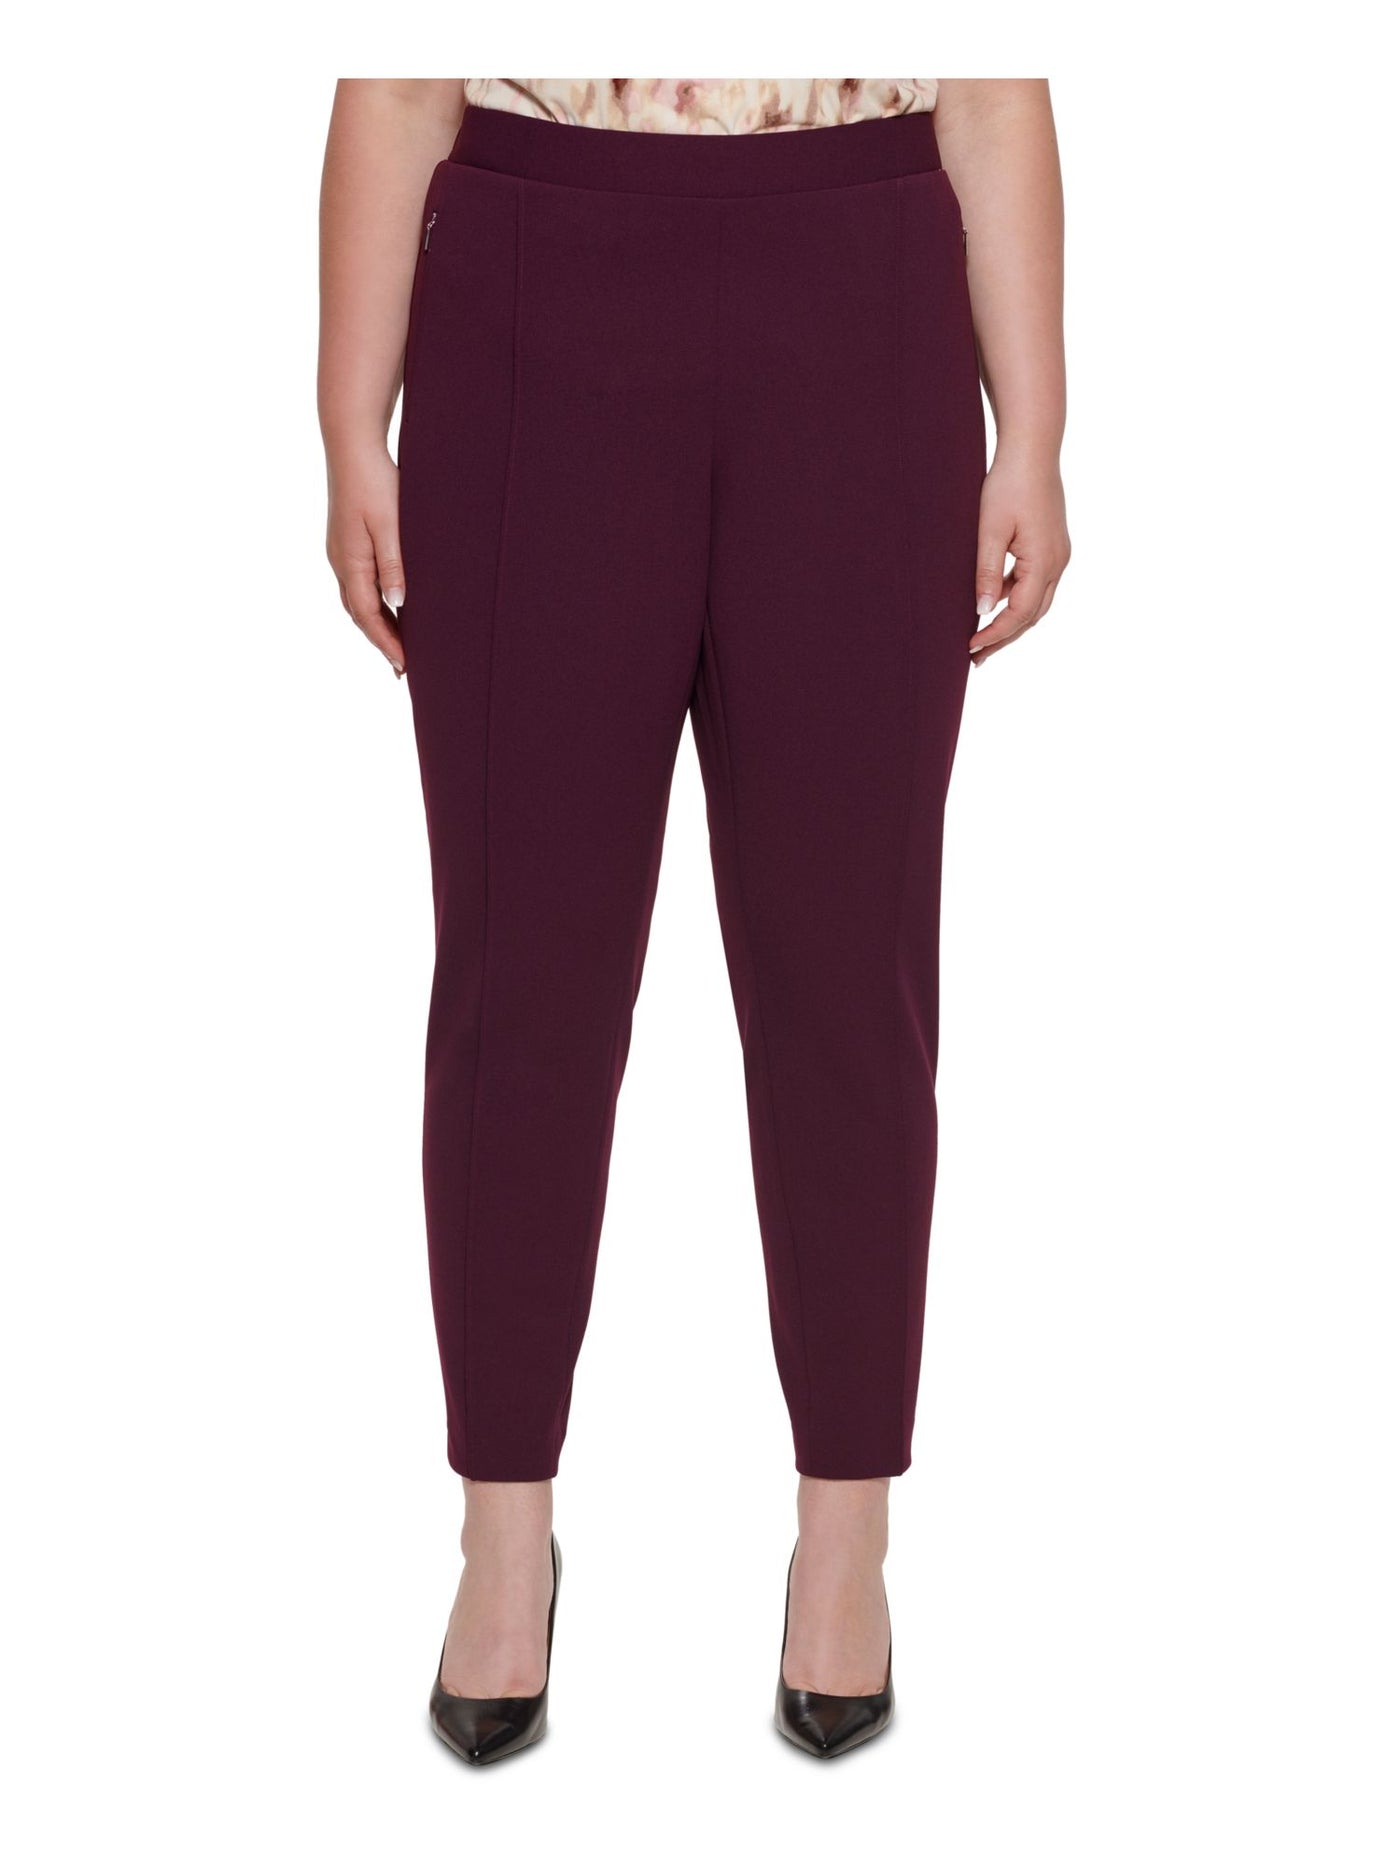 CALVIN KLEIN Womens Purple Stretch Pocketed Mid-rise Pull-on Style Wear To Work Straight leg Pants Plus 22W